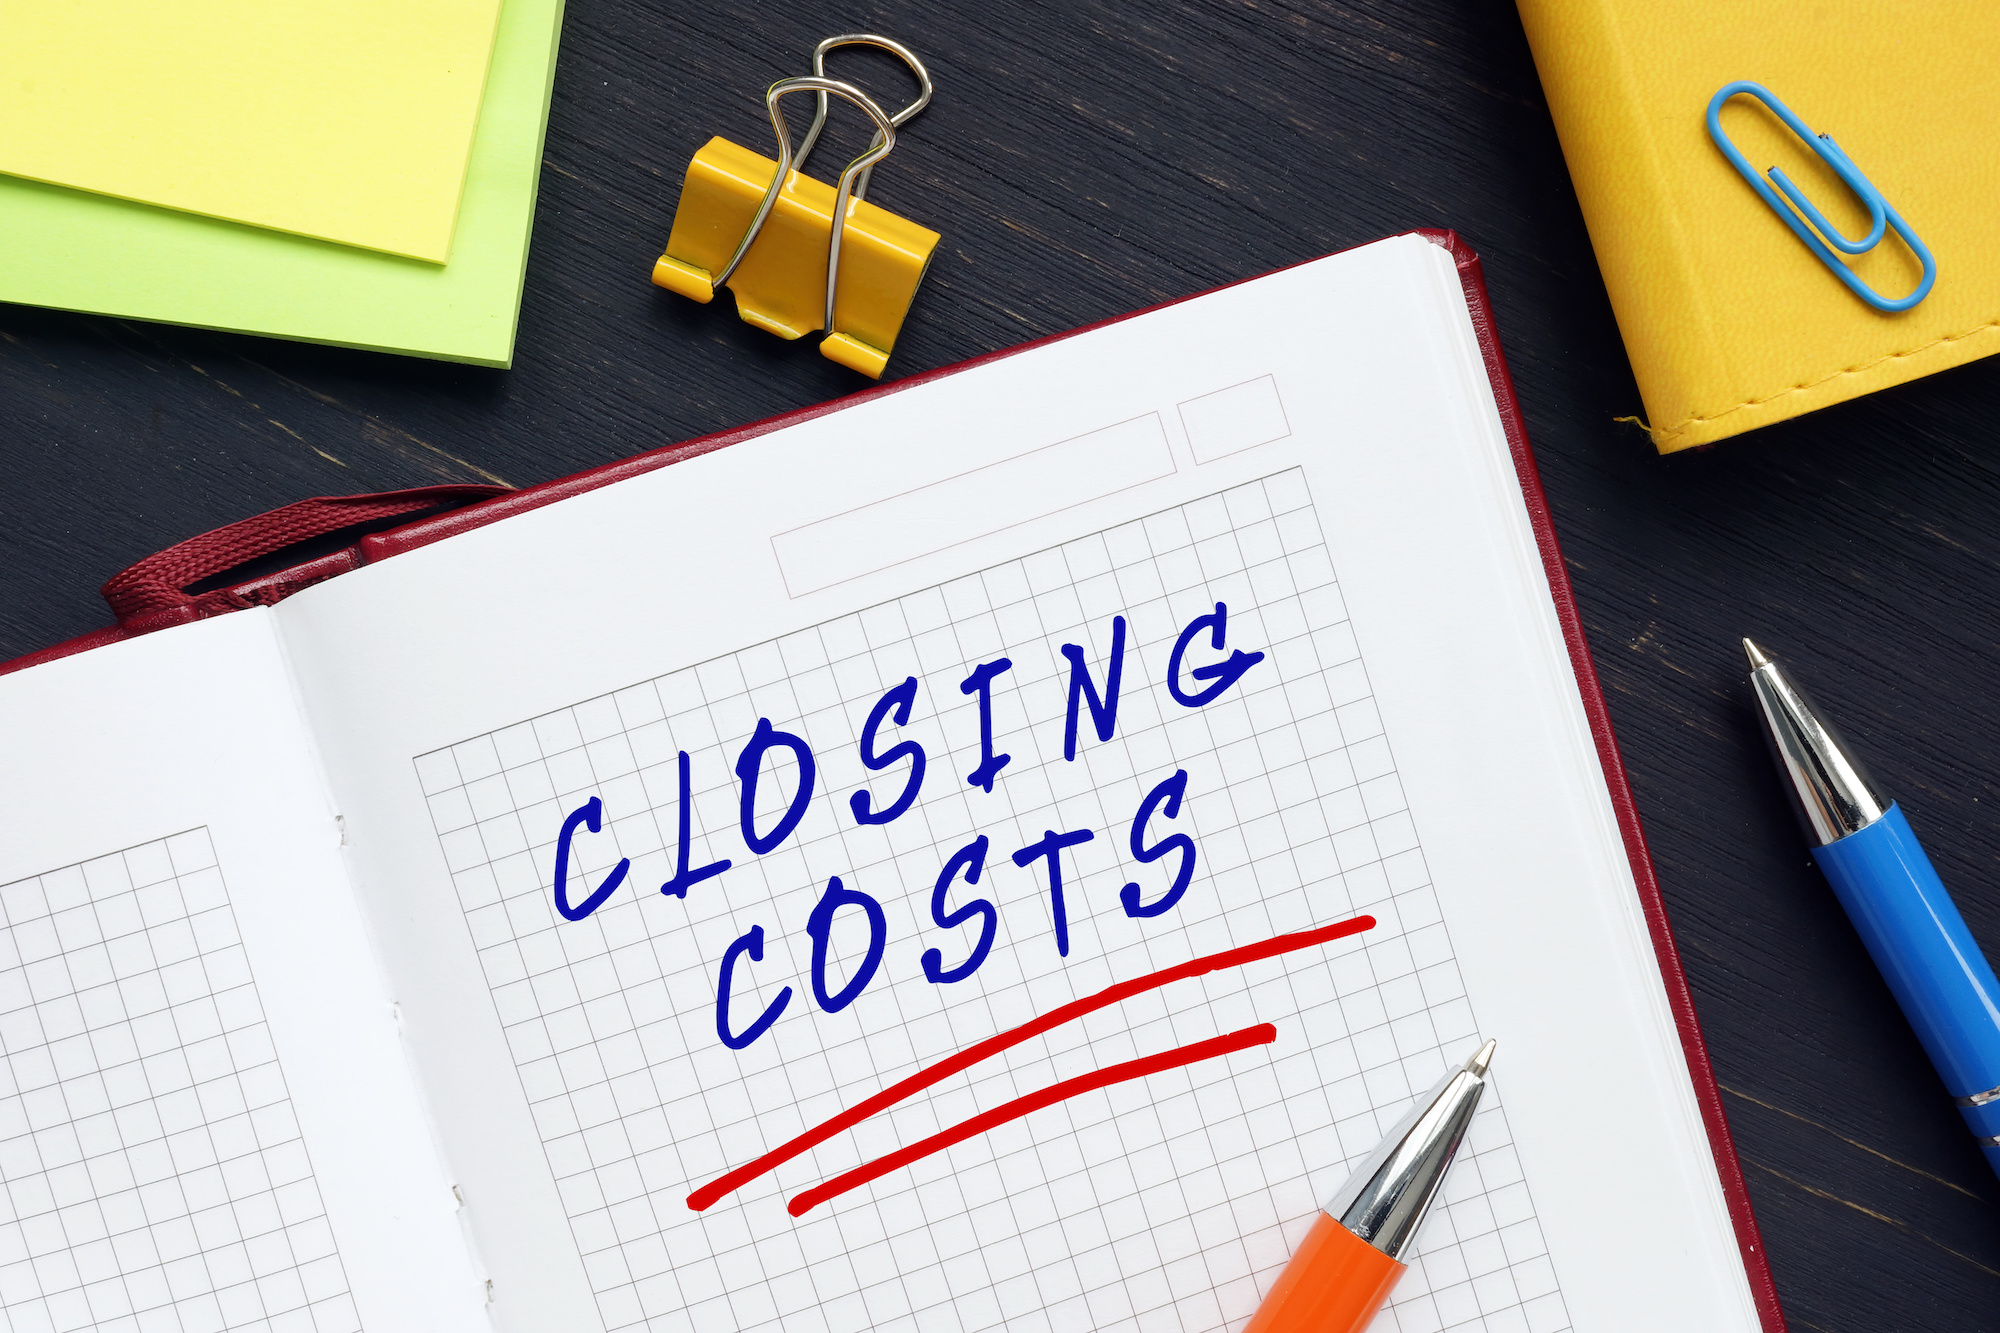 Notebook with "closing costs" written in blue ink.